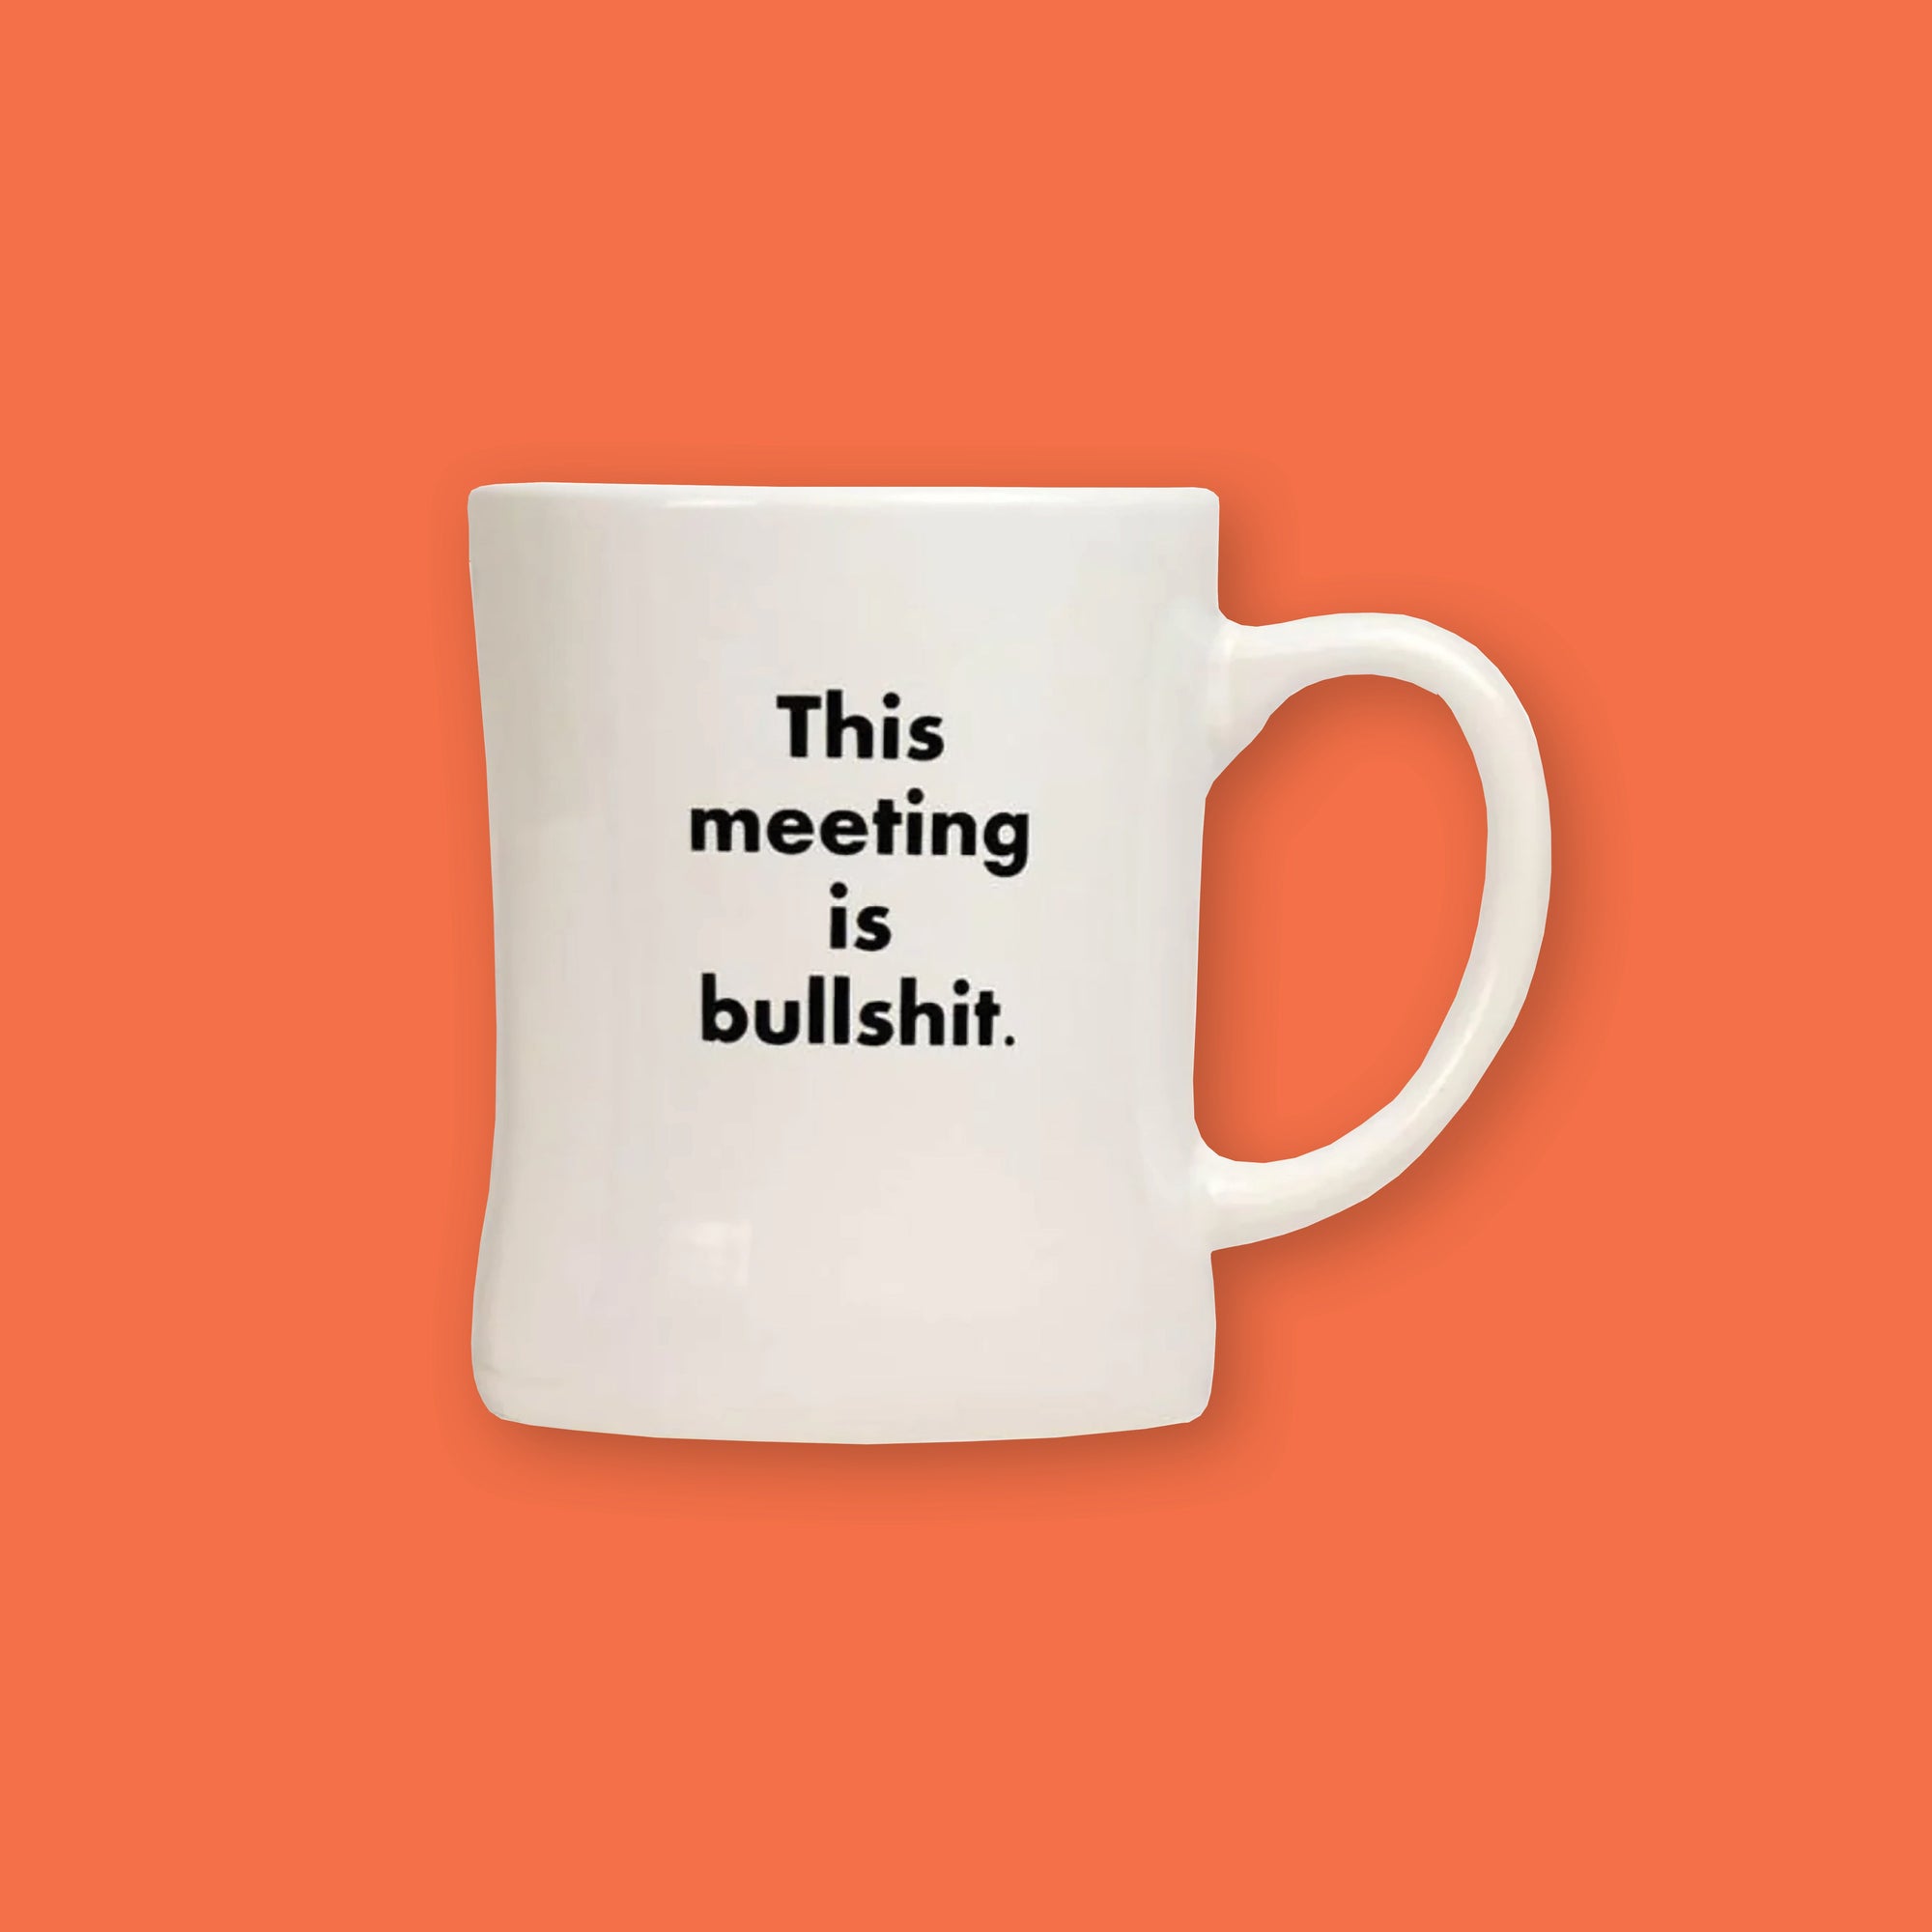 On an orangey-red background sits a mug. This white, diner style mug says "This meeting is bullshit." in black, block font.